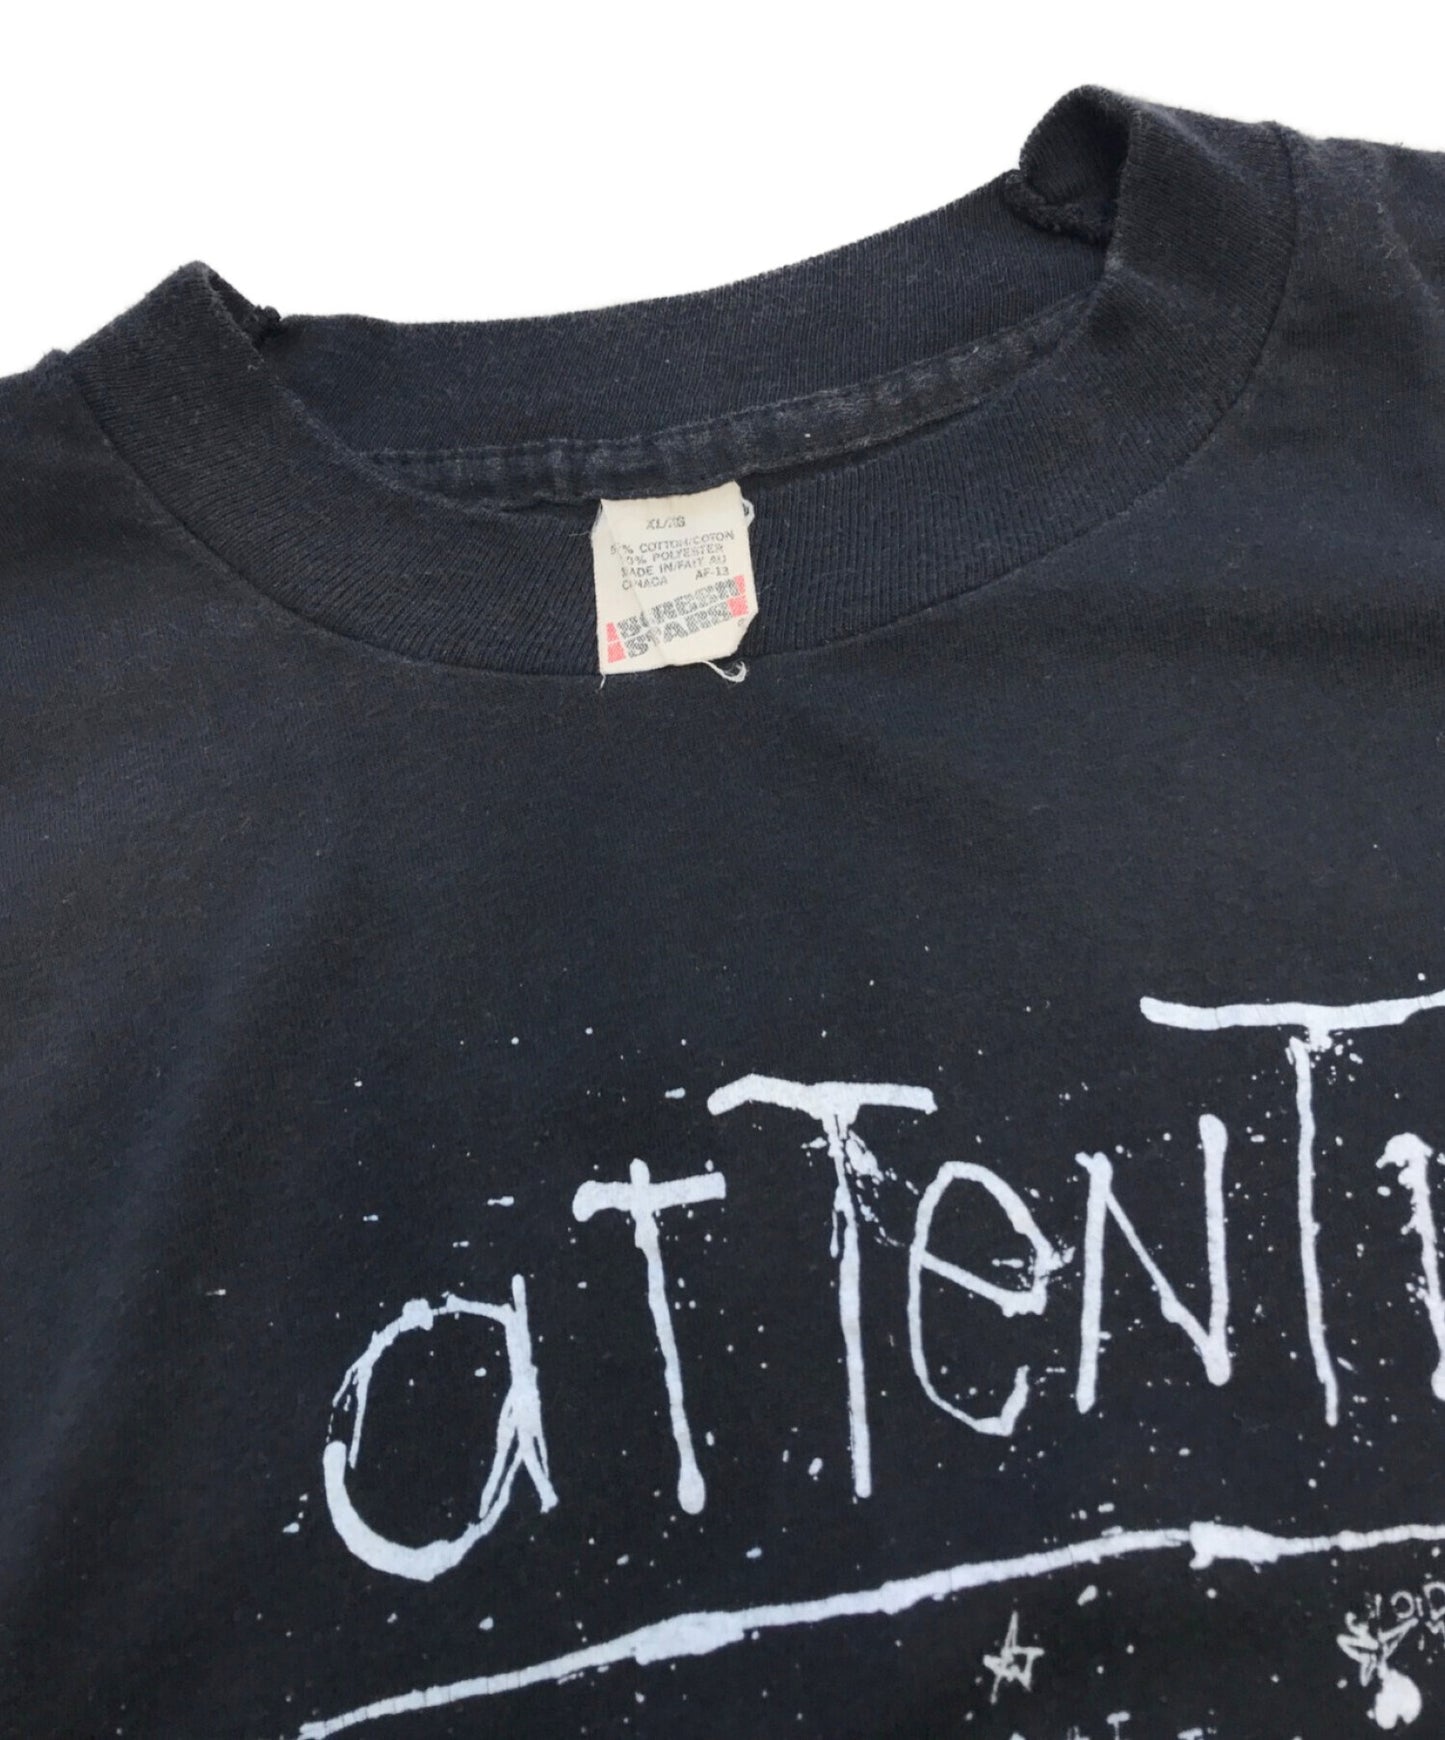 MIDNIGHT OIL 80's Band T-shirt